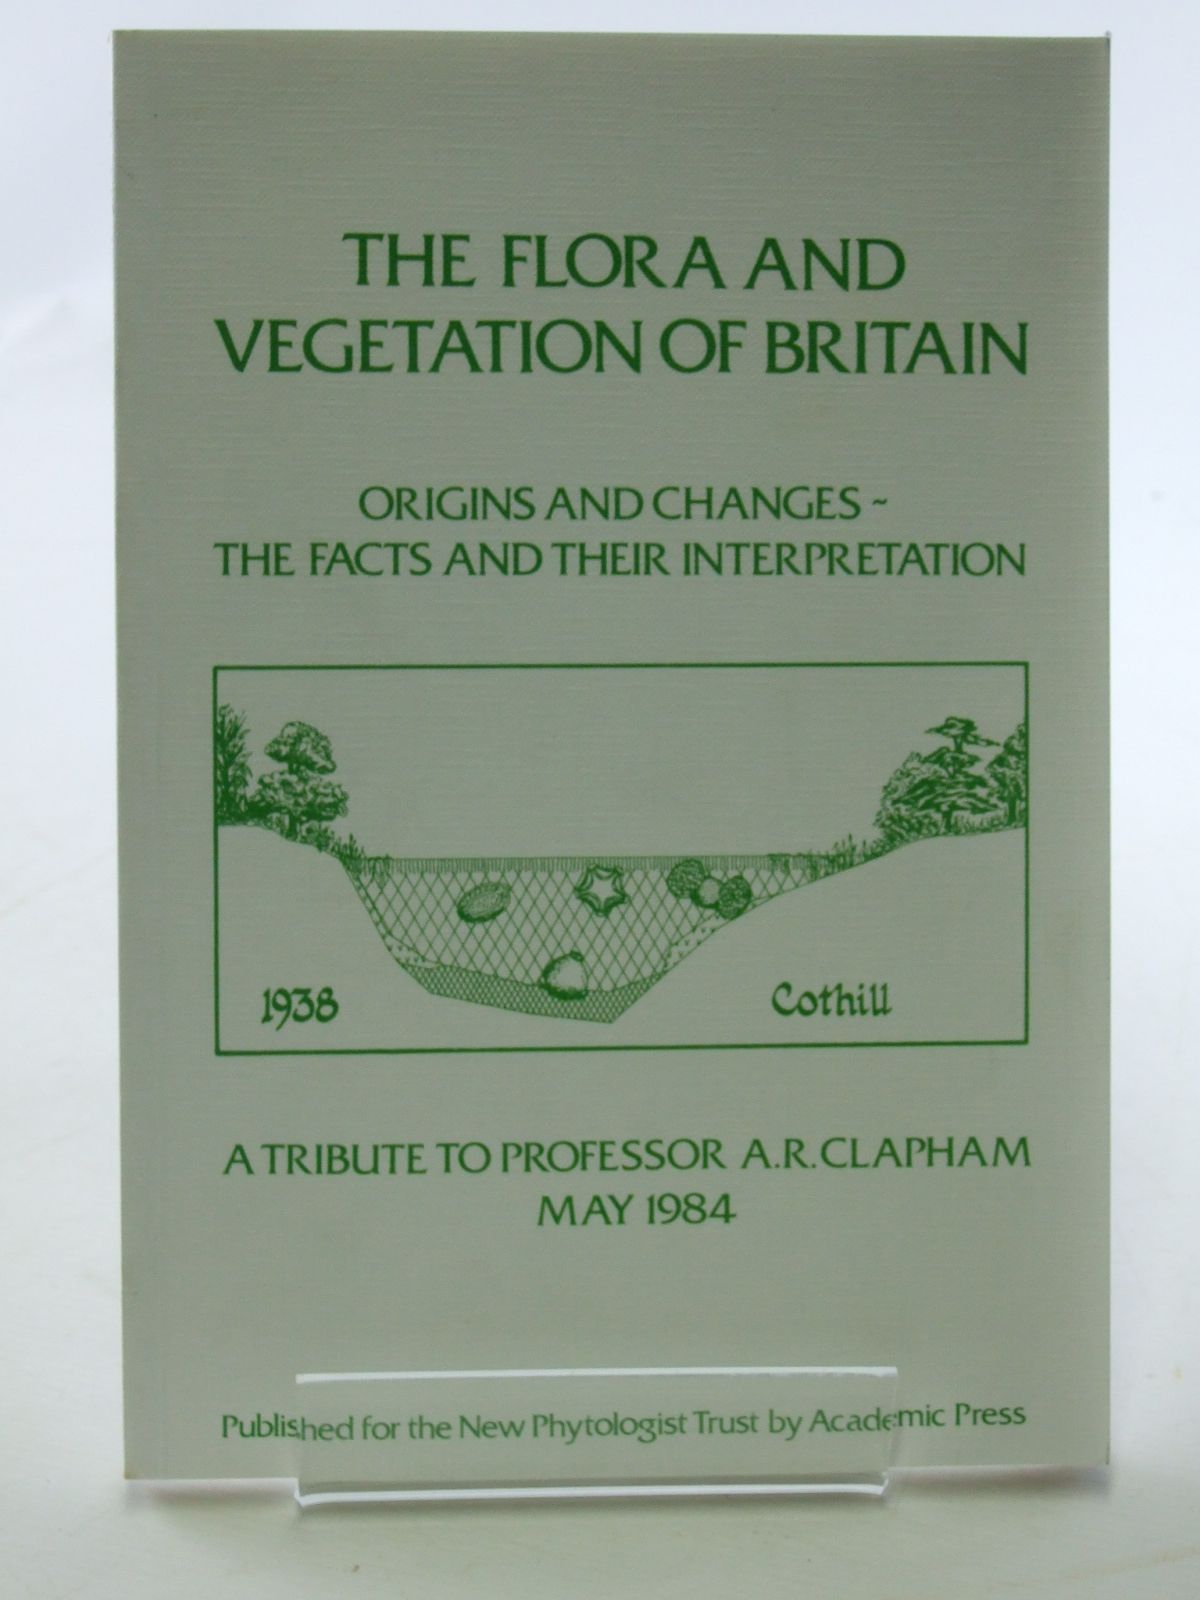 Photo of THE FLORA AND VEGETATION OF BRITAIN written by Harley, J.L. Lewis, D.H. published by Academic Press (STOCK CODE: 1602936)  for sale by Stella & Rose's Books